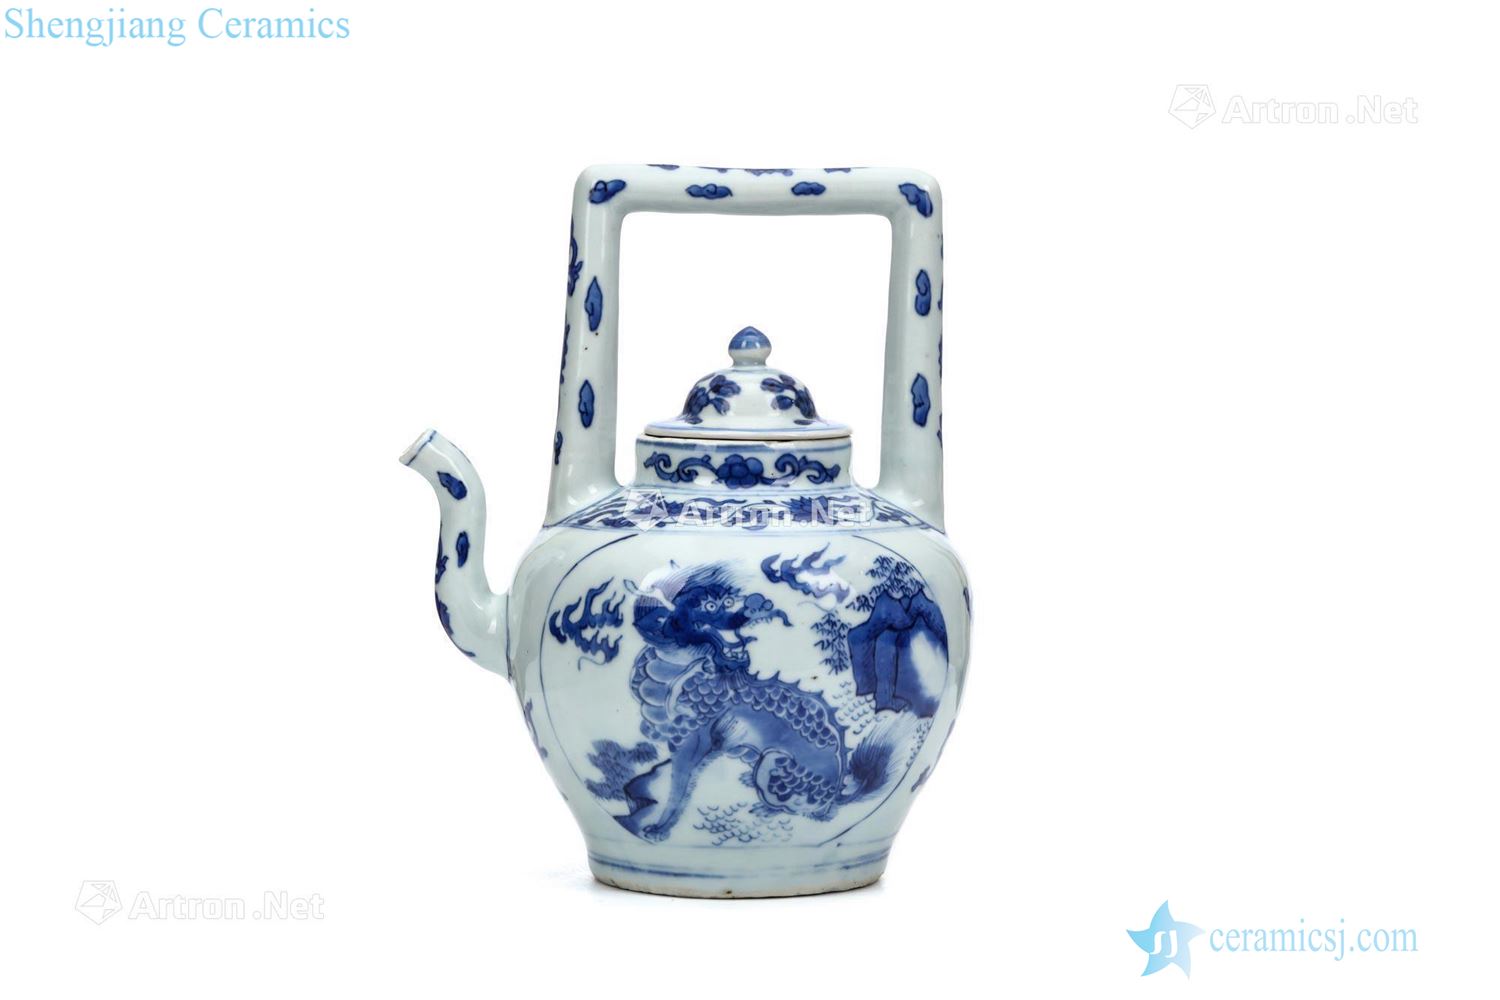 The late Ming dynasty Blue and white GaiHu